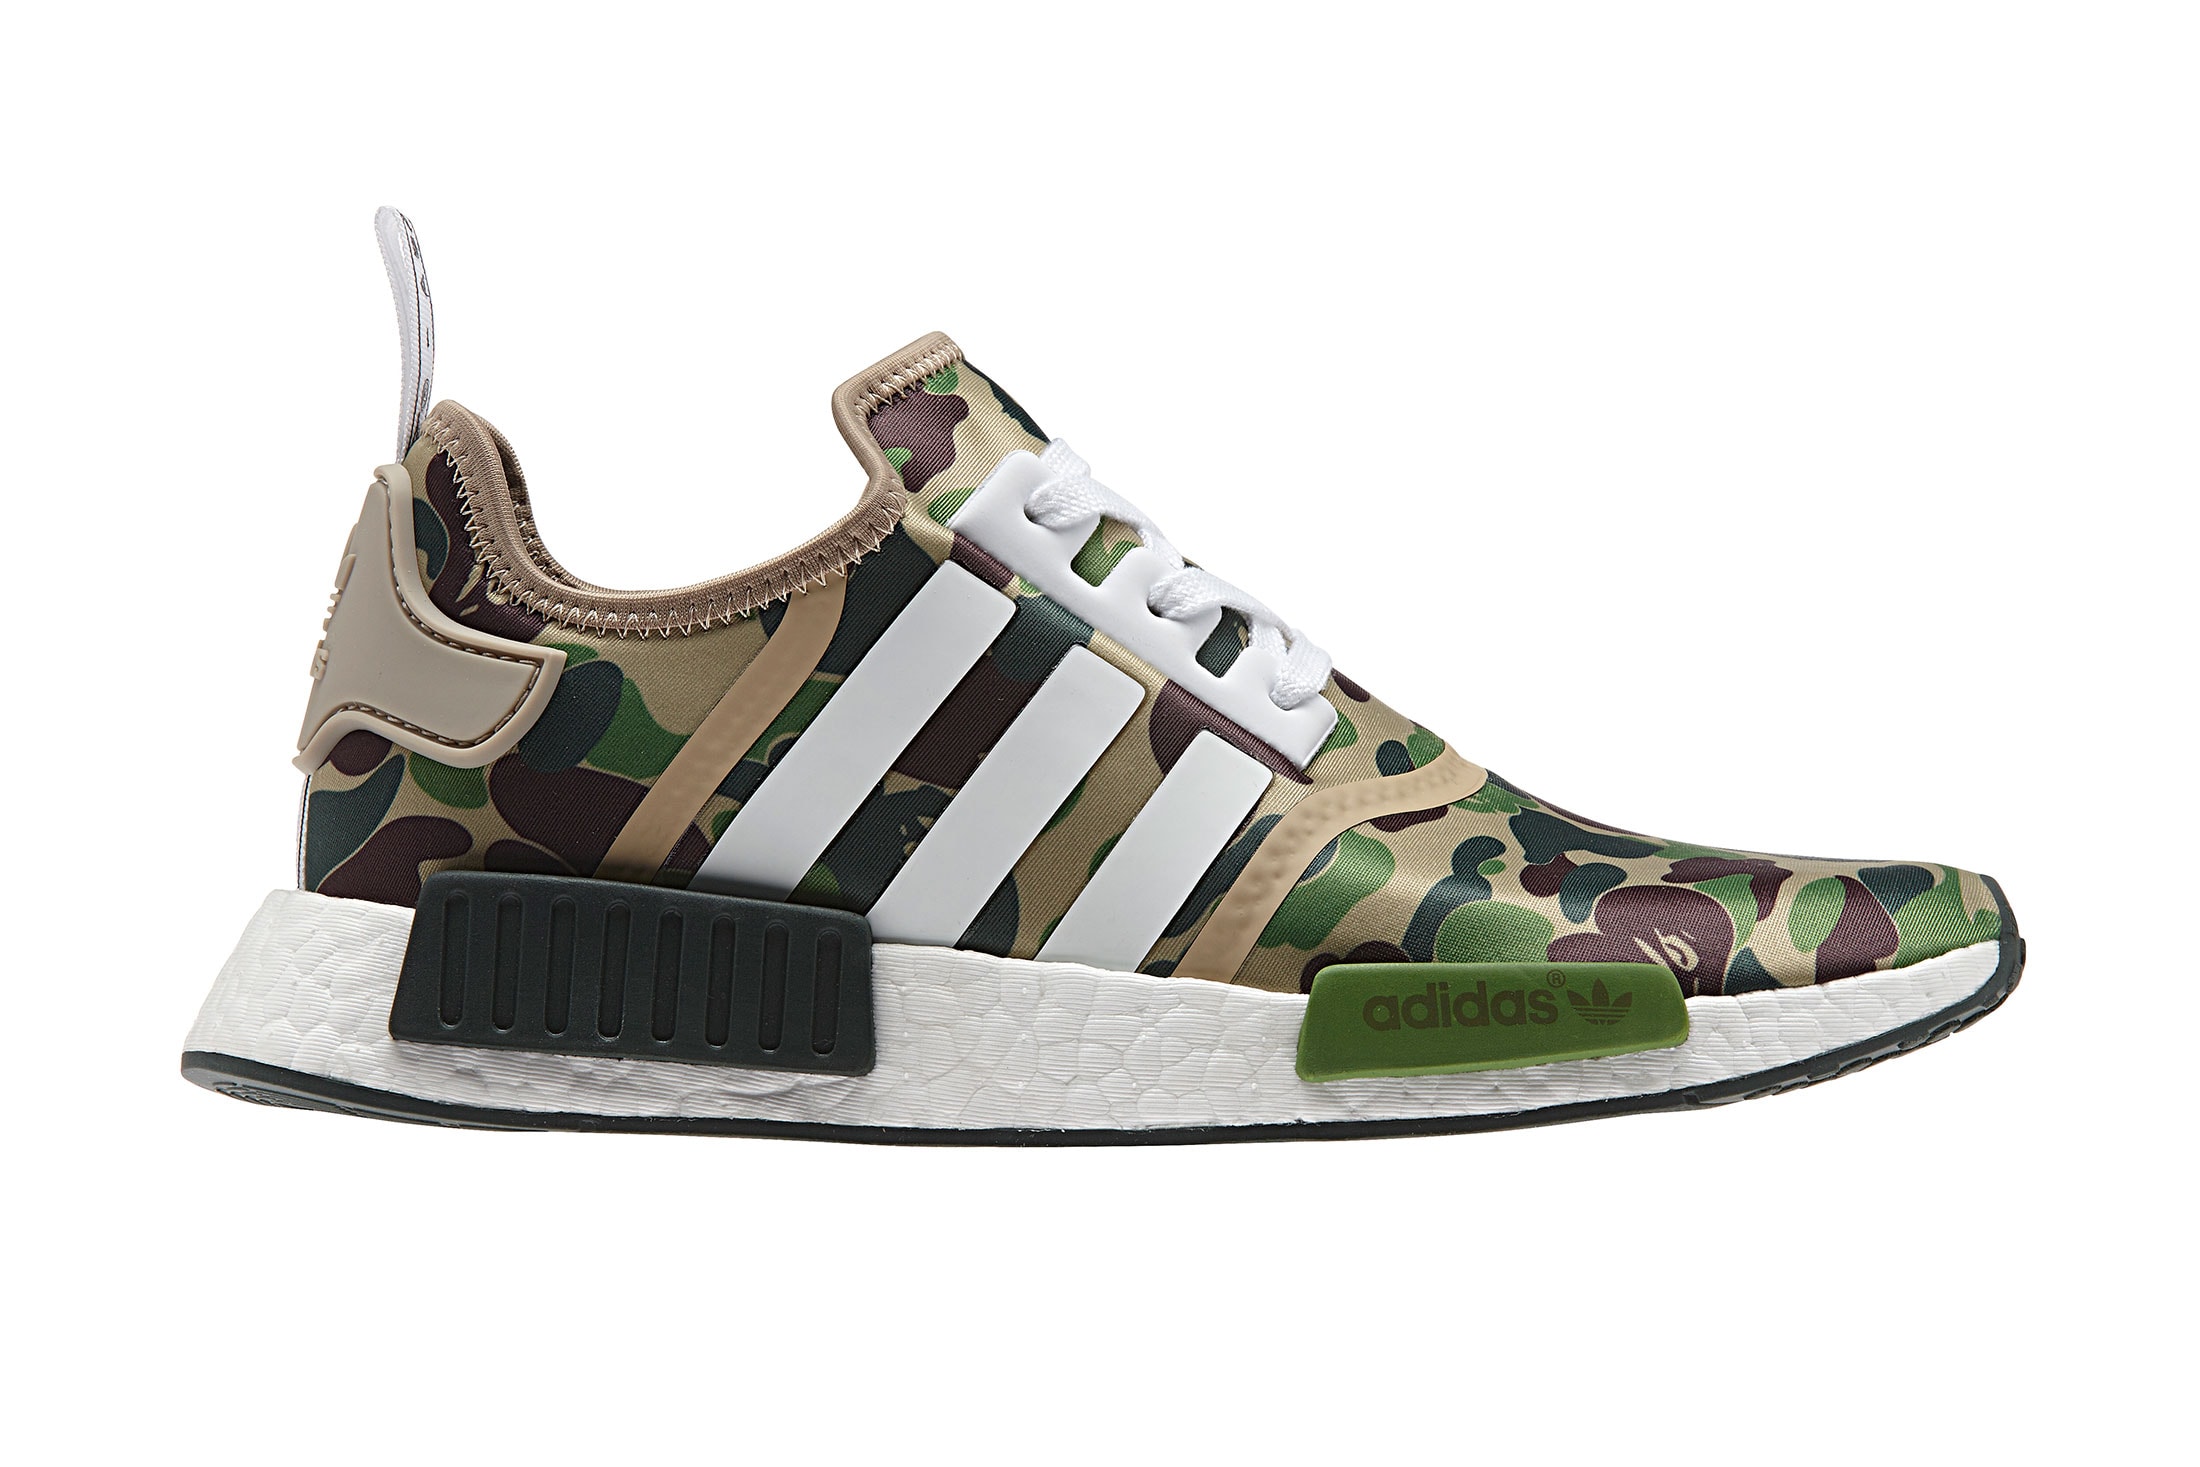 BAPE and adidas Originals are collaborating once again on a new